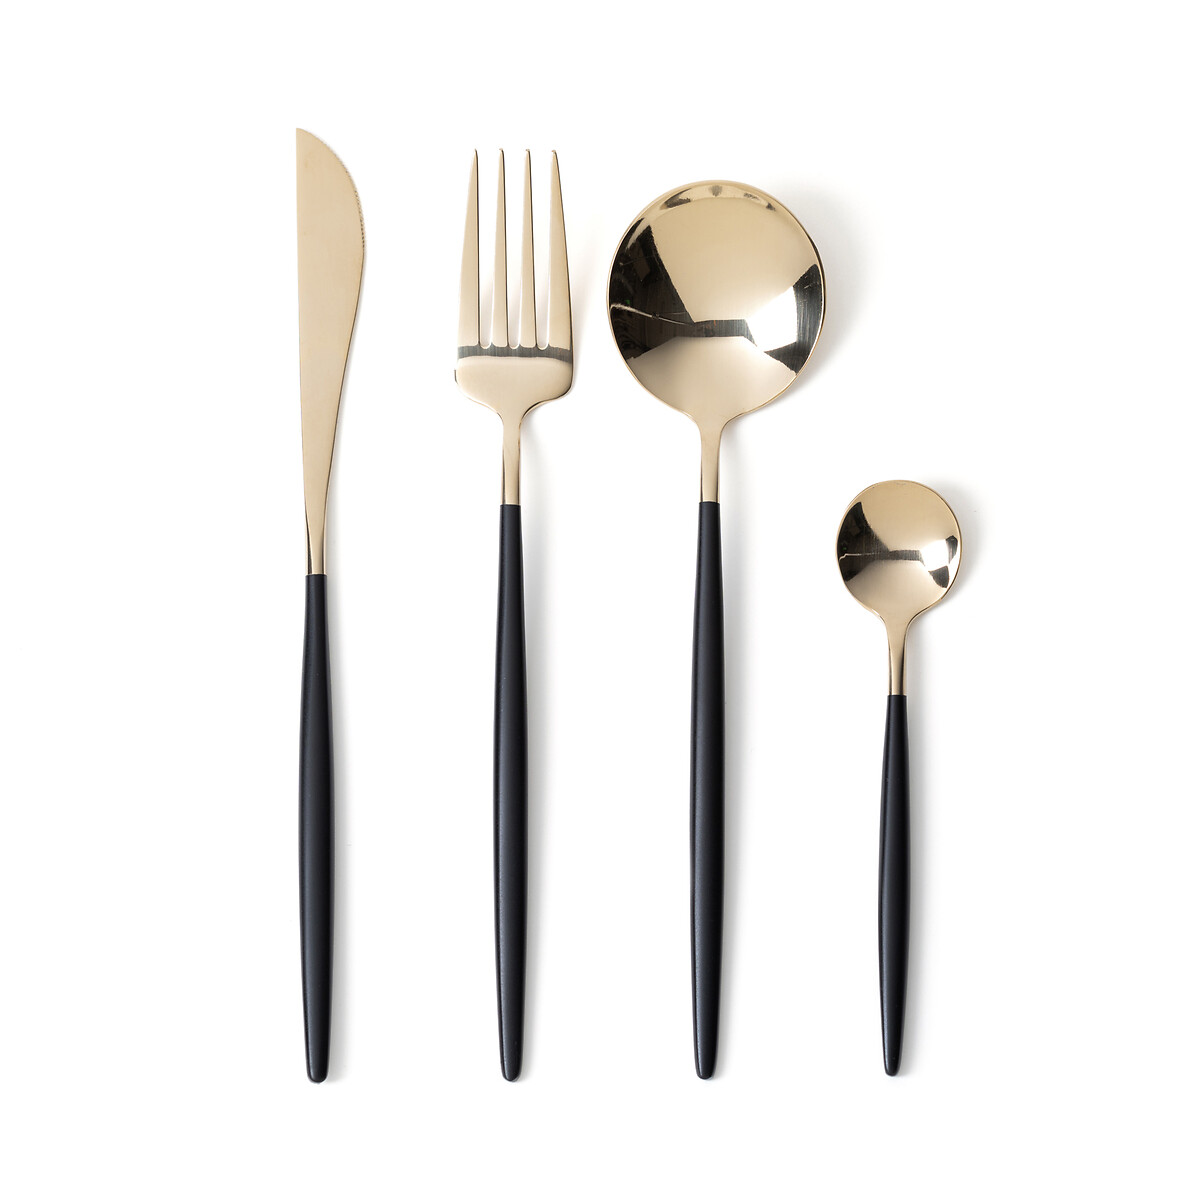 Barbule Golden Stainless Steel and Black 16-Piece Cutlery Set